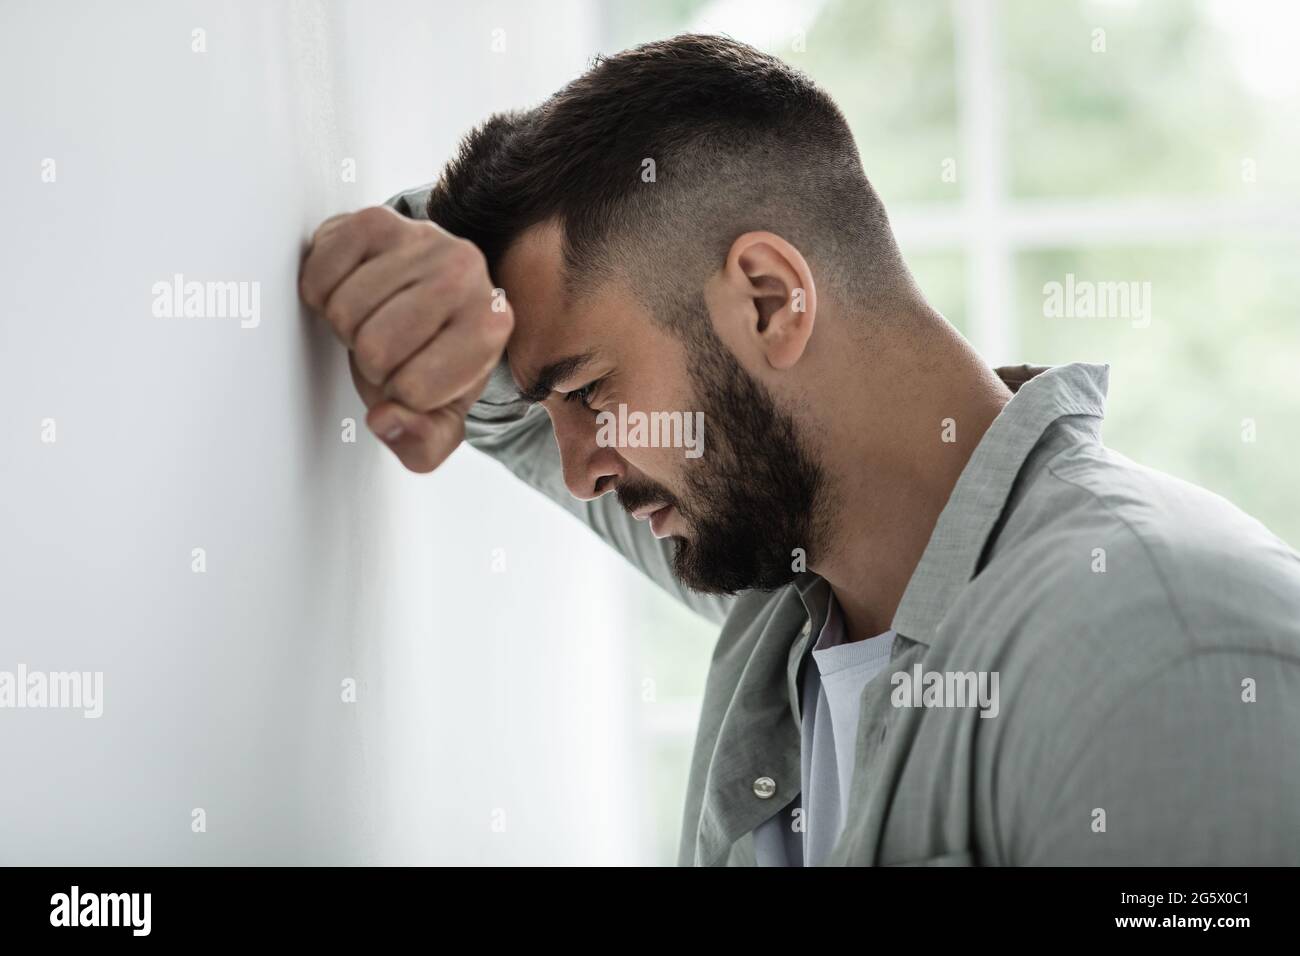 Emotional stress and unhappy, despair, grief and negative emotions, anxiety and agoraphobia Stock Photo